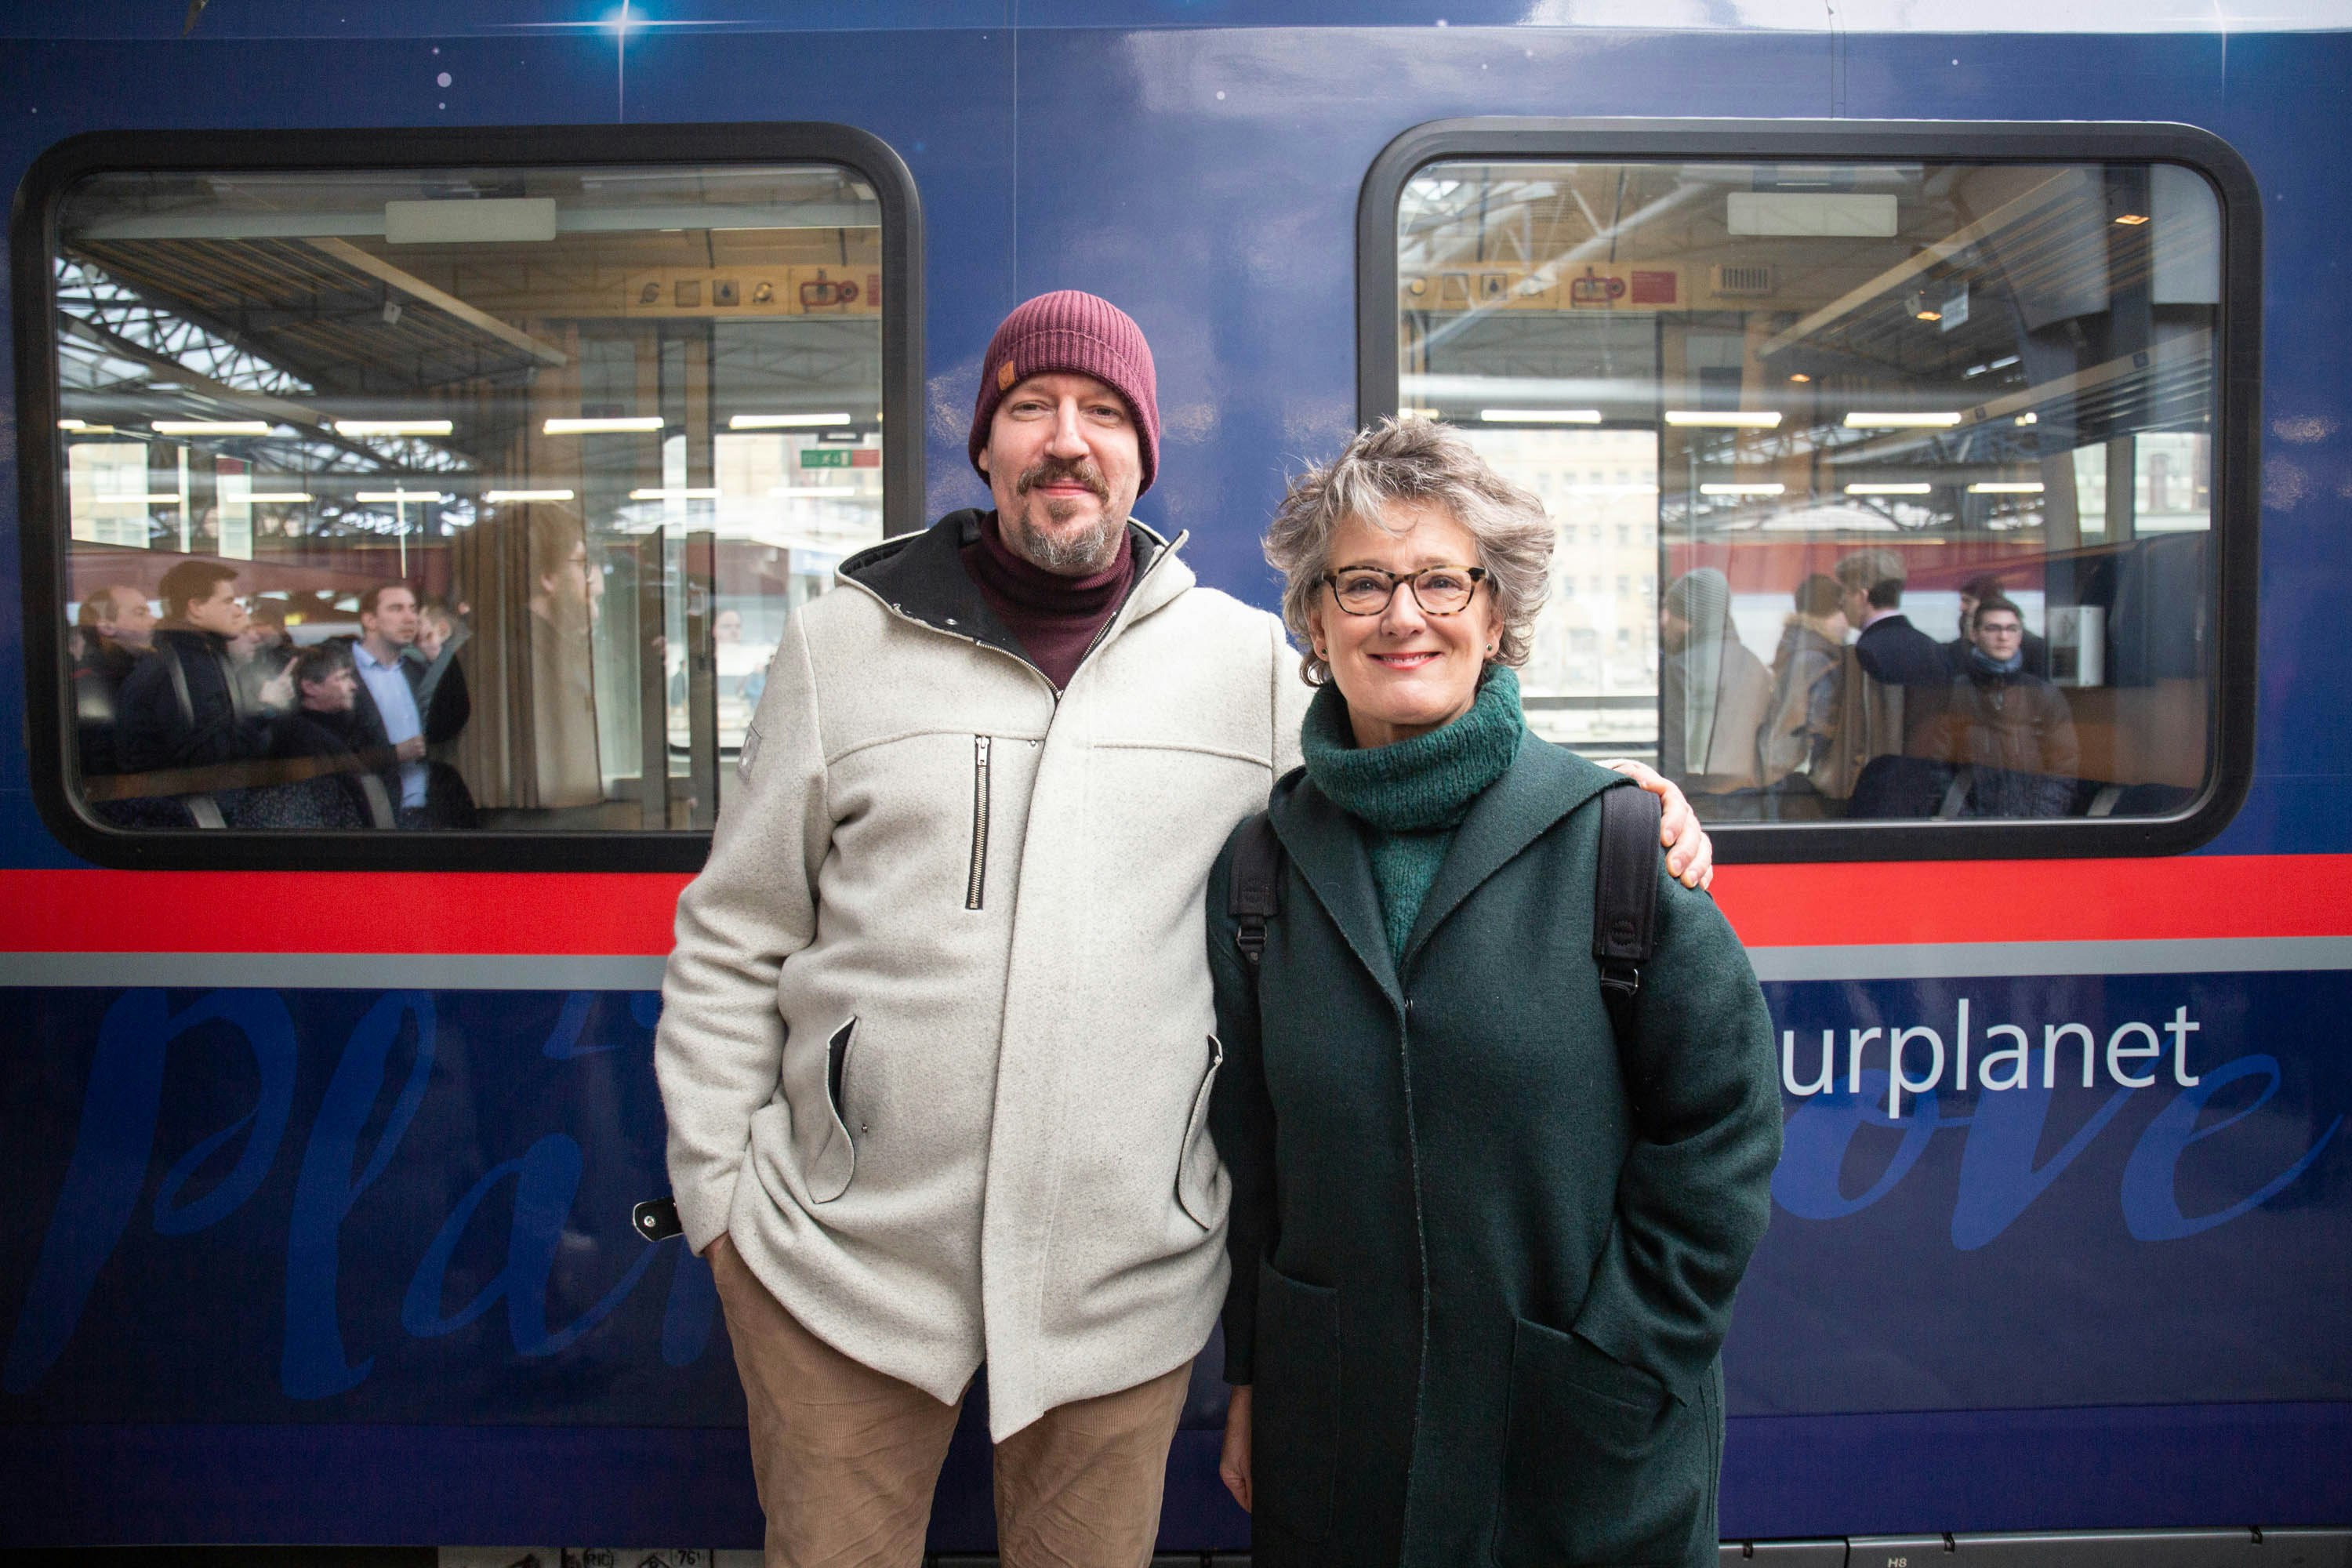 More trains! More accessible fares! European Greens on board the first Vienna-Brussels night train.